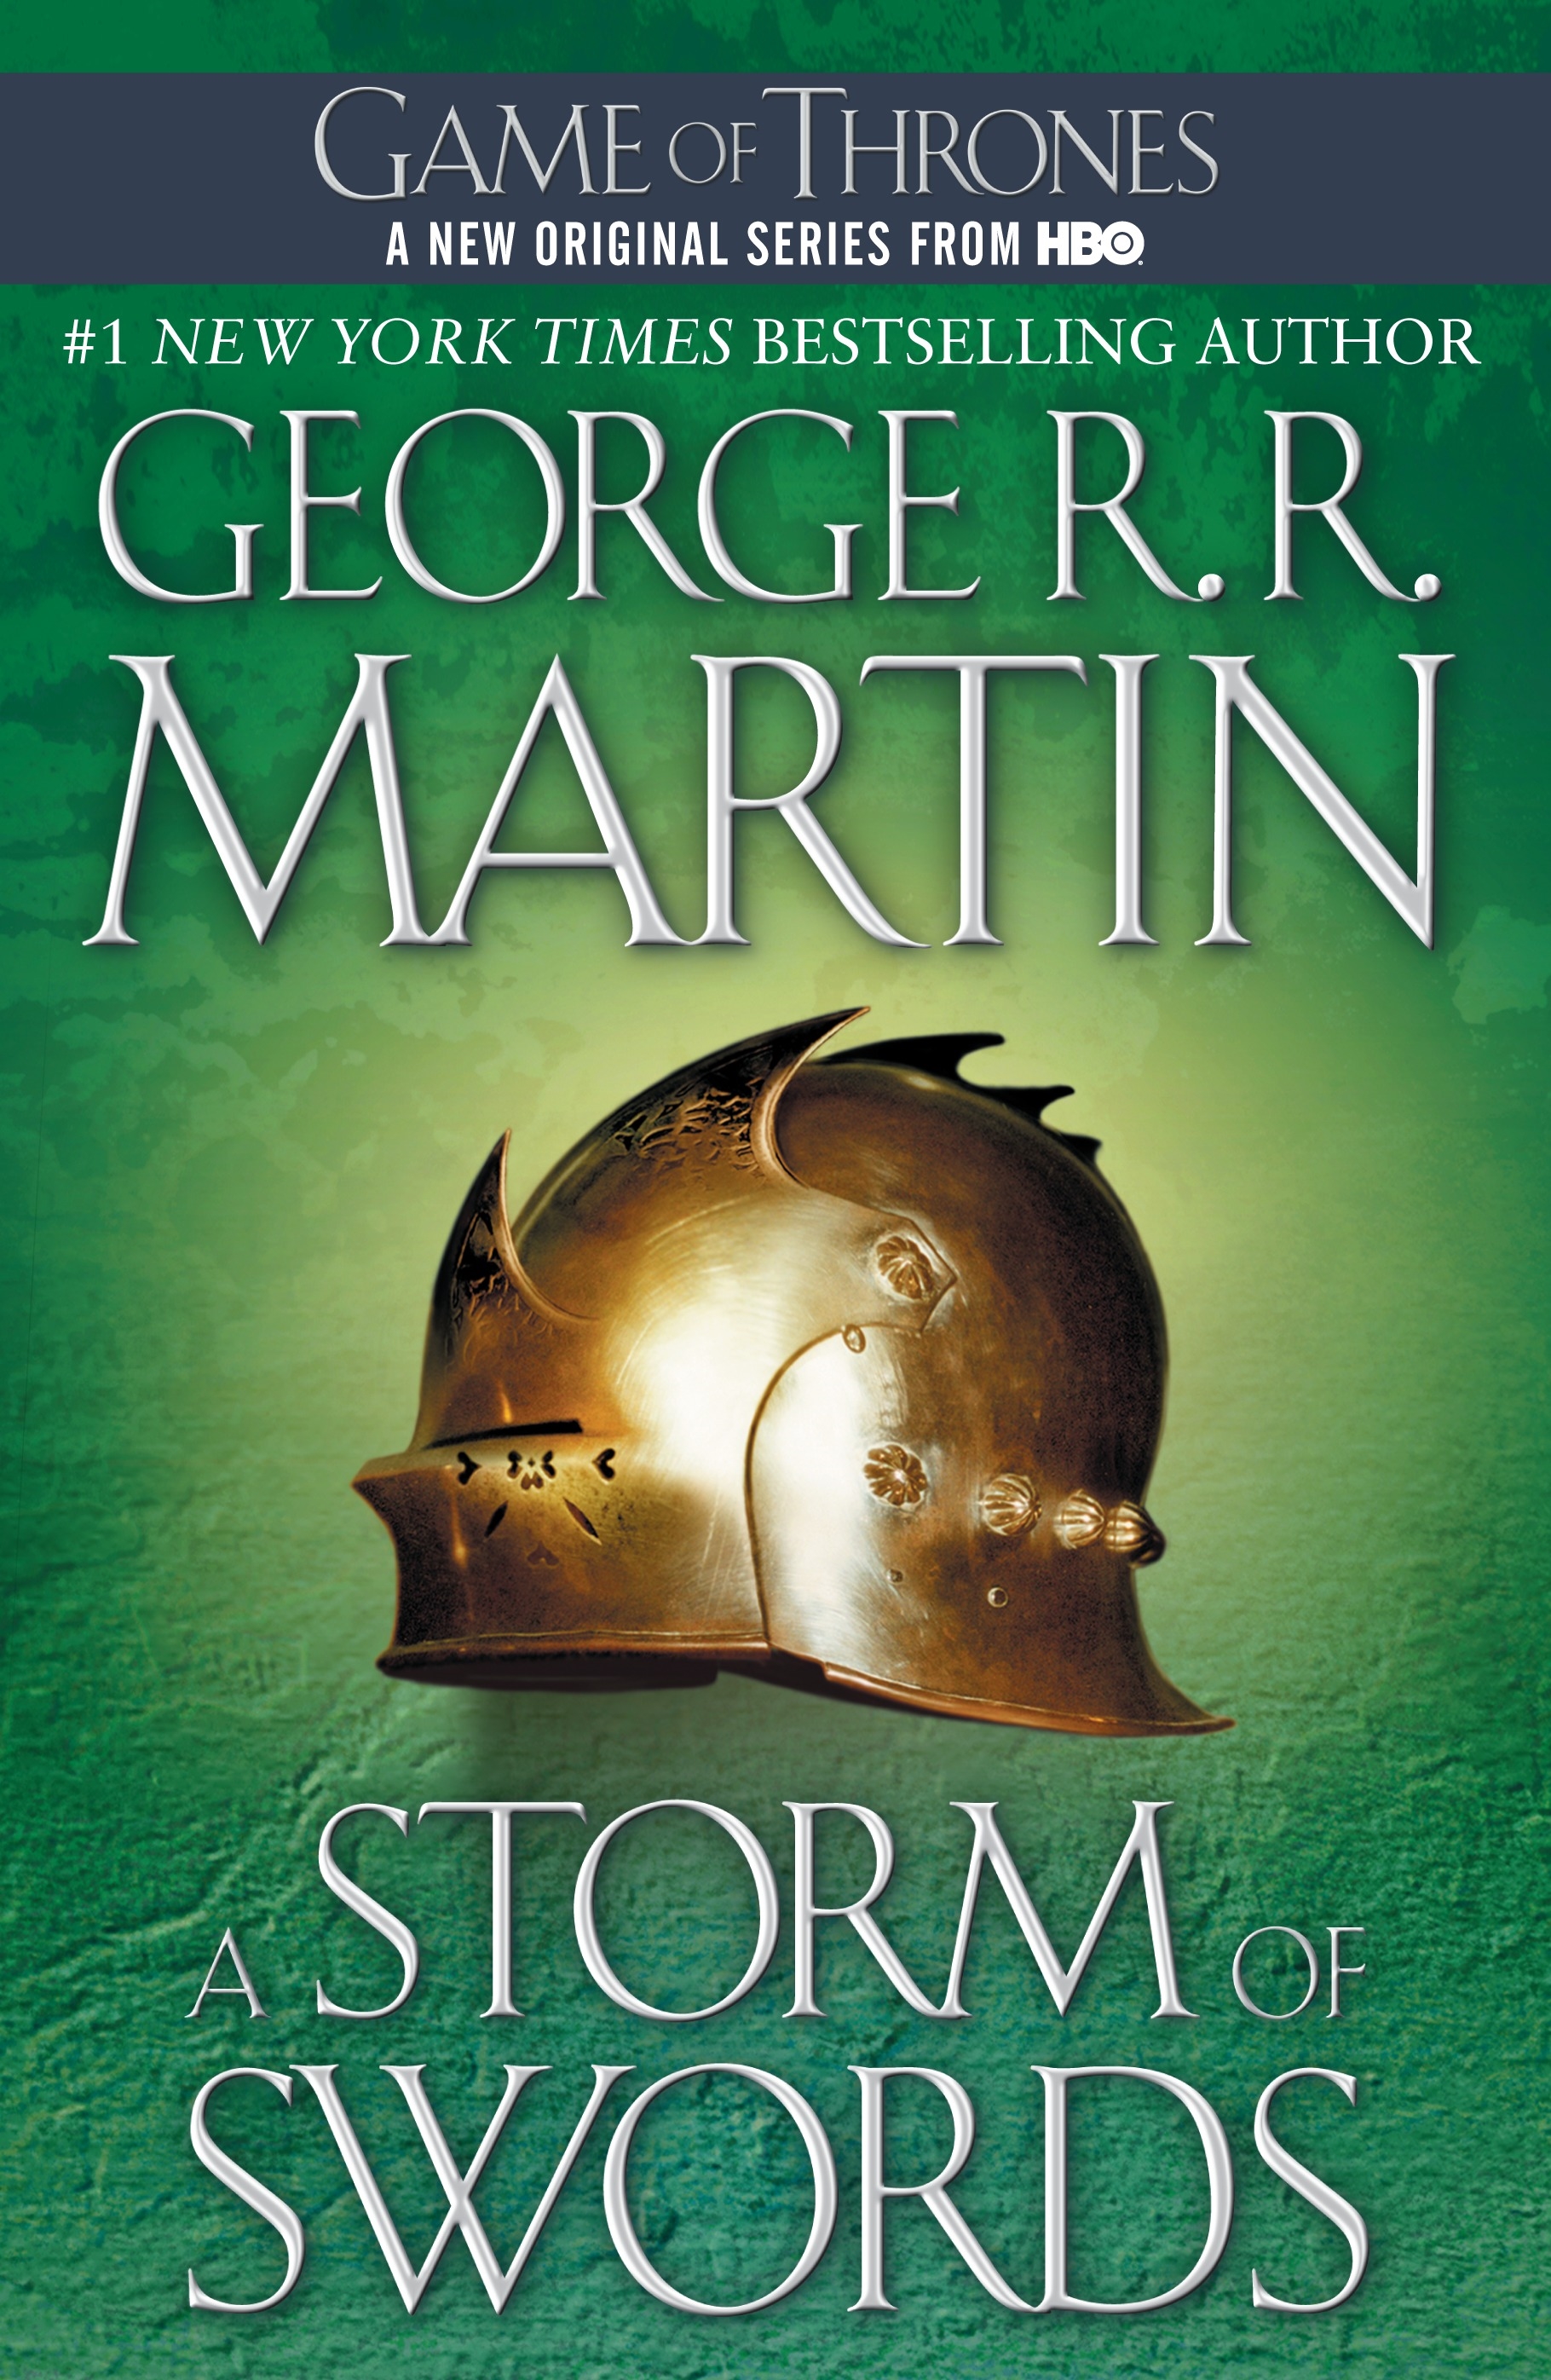 Books Kinokuniya: A Game of Thrones: the Story Continues : The